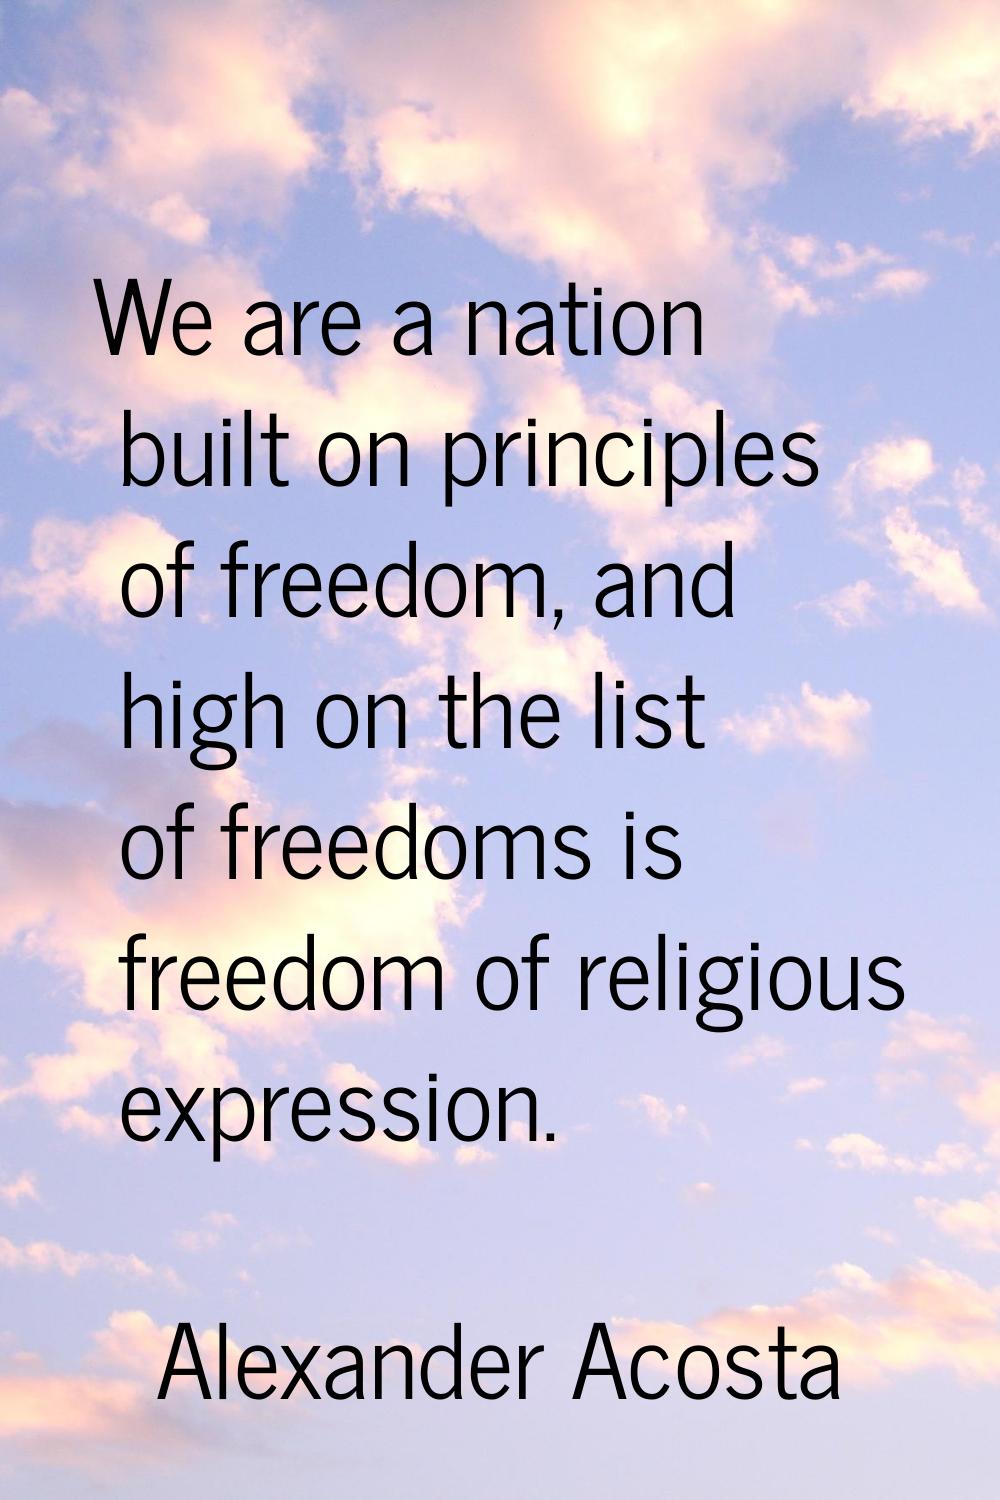 We are a nation built on principles of freedom, and high on the list of freedoms is freedom of reli